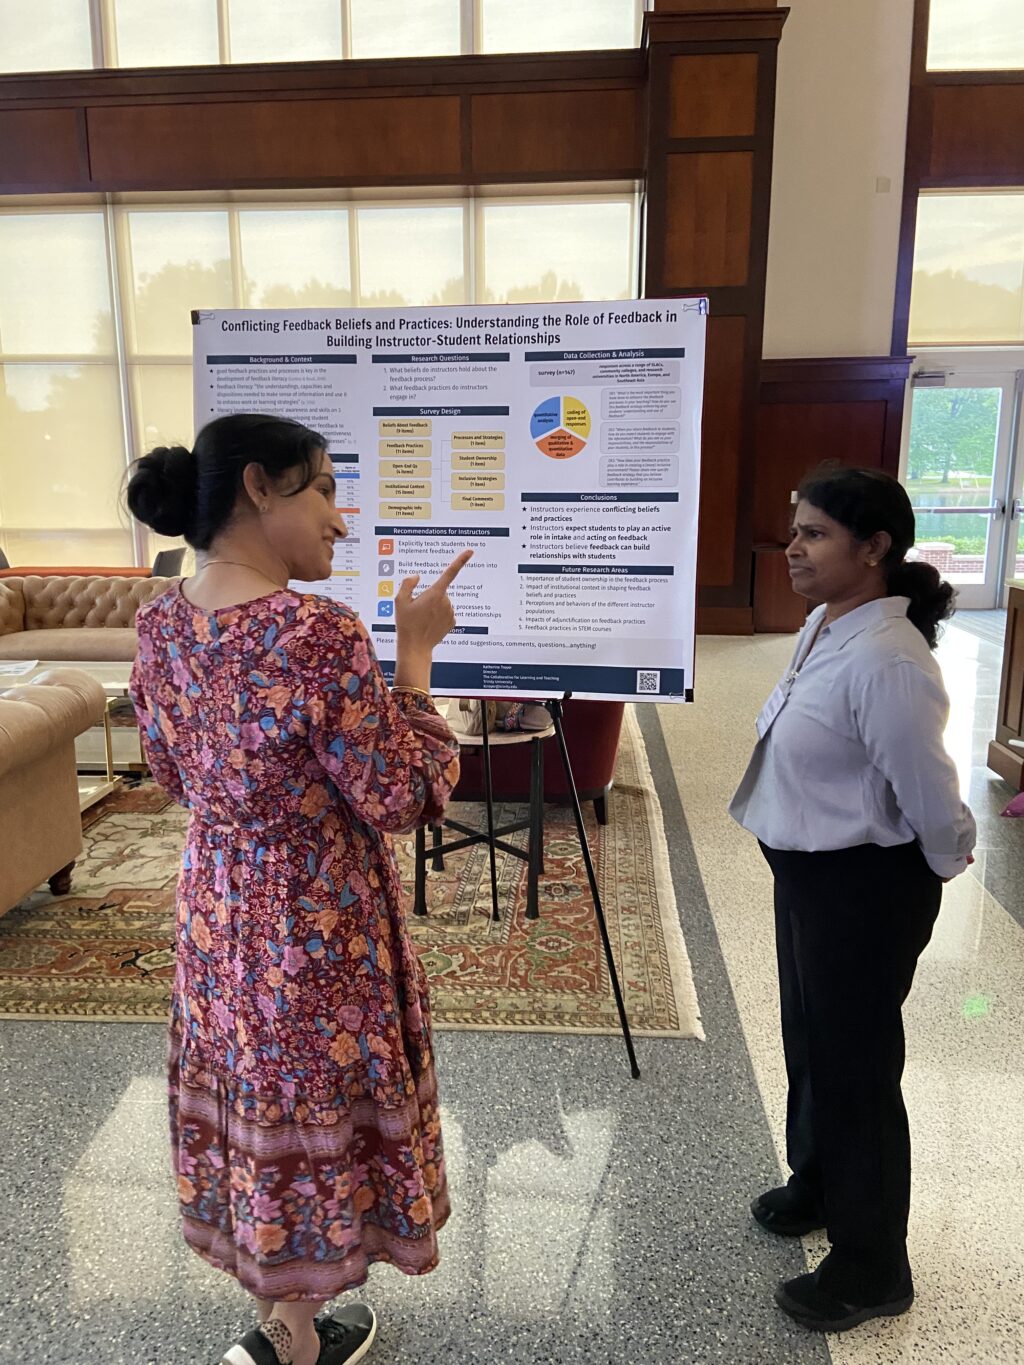 Two people stand and talk in front of an academic conference poster.